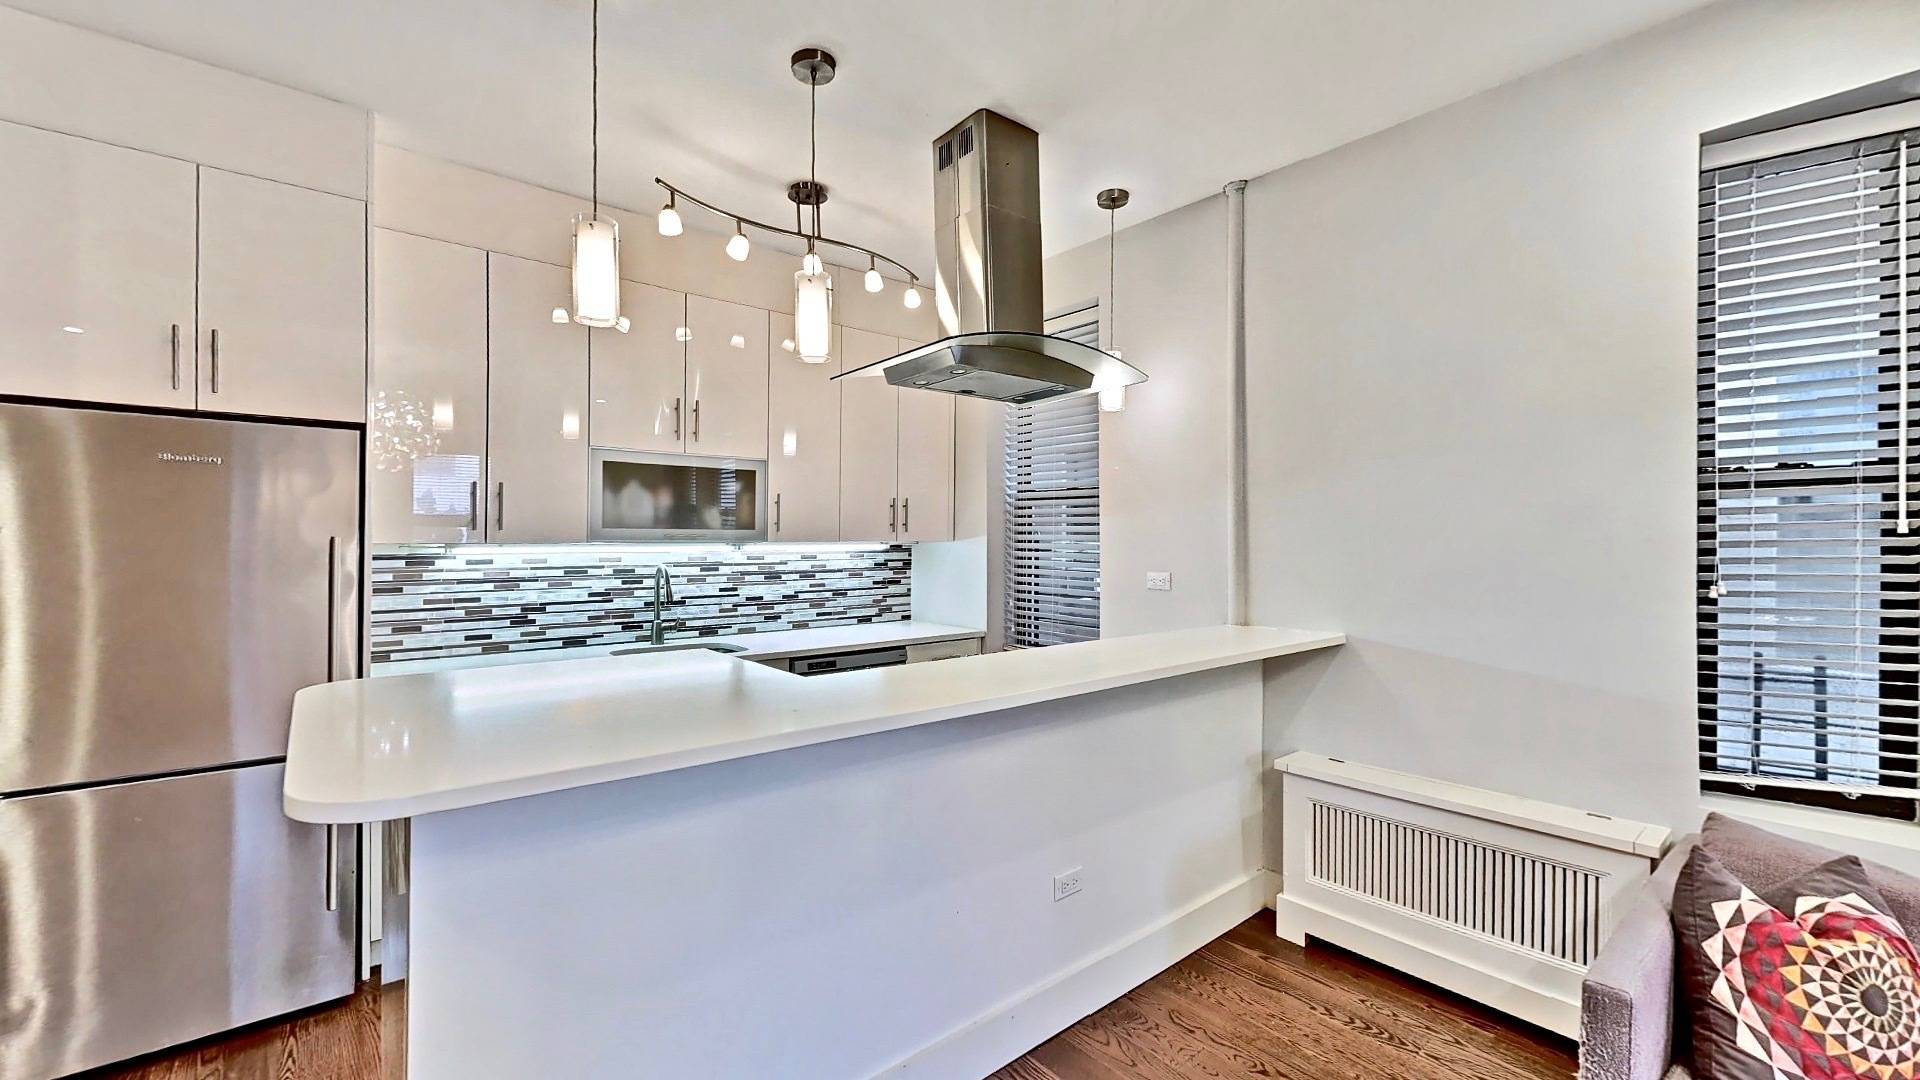 All showings are by appointment only with Covid Disclosures signed prior to confirmation Fully Renovated Pre War Condo in Booming Washington Heights !